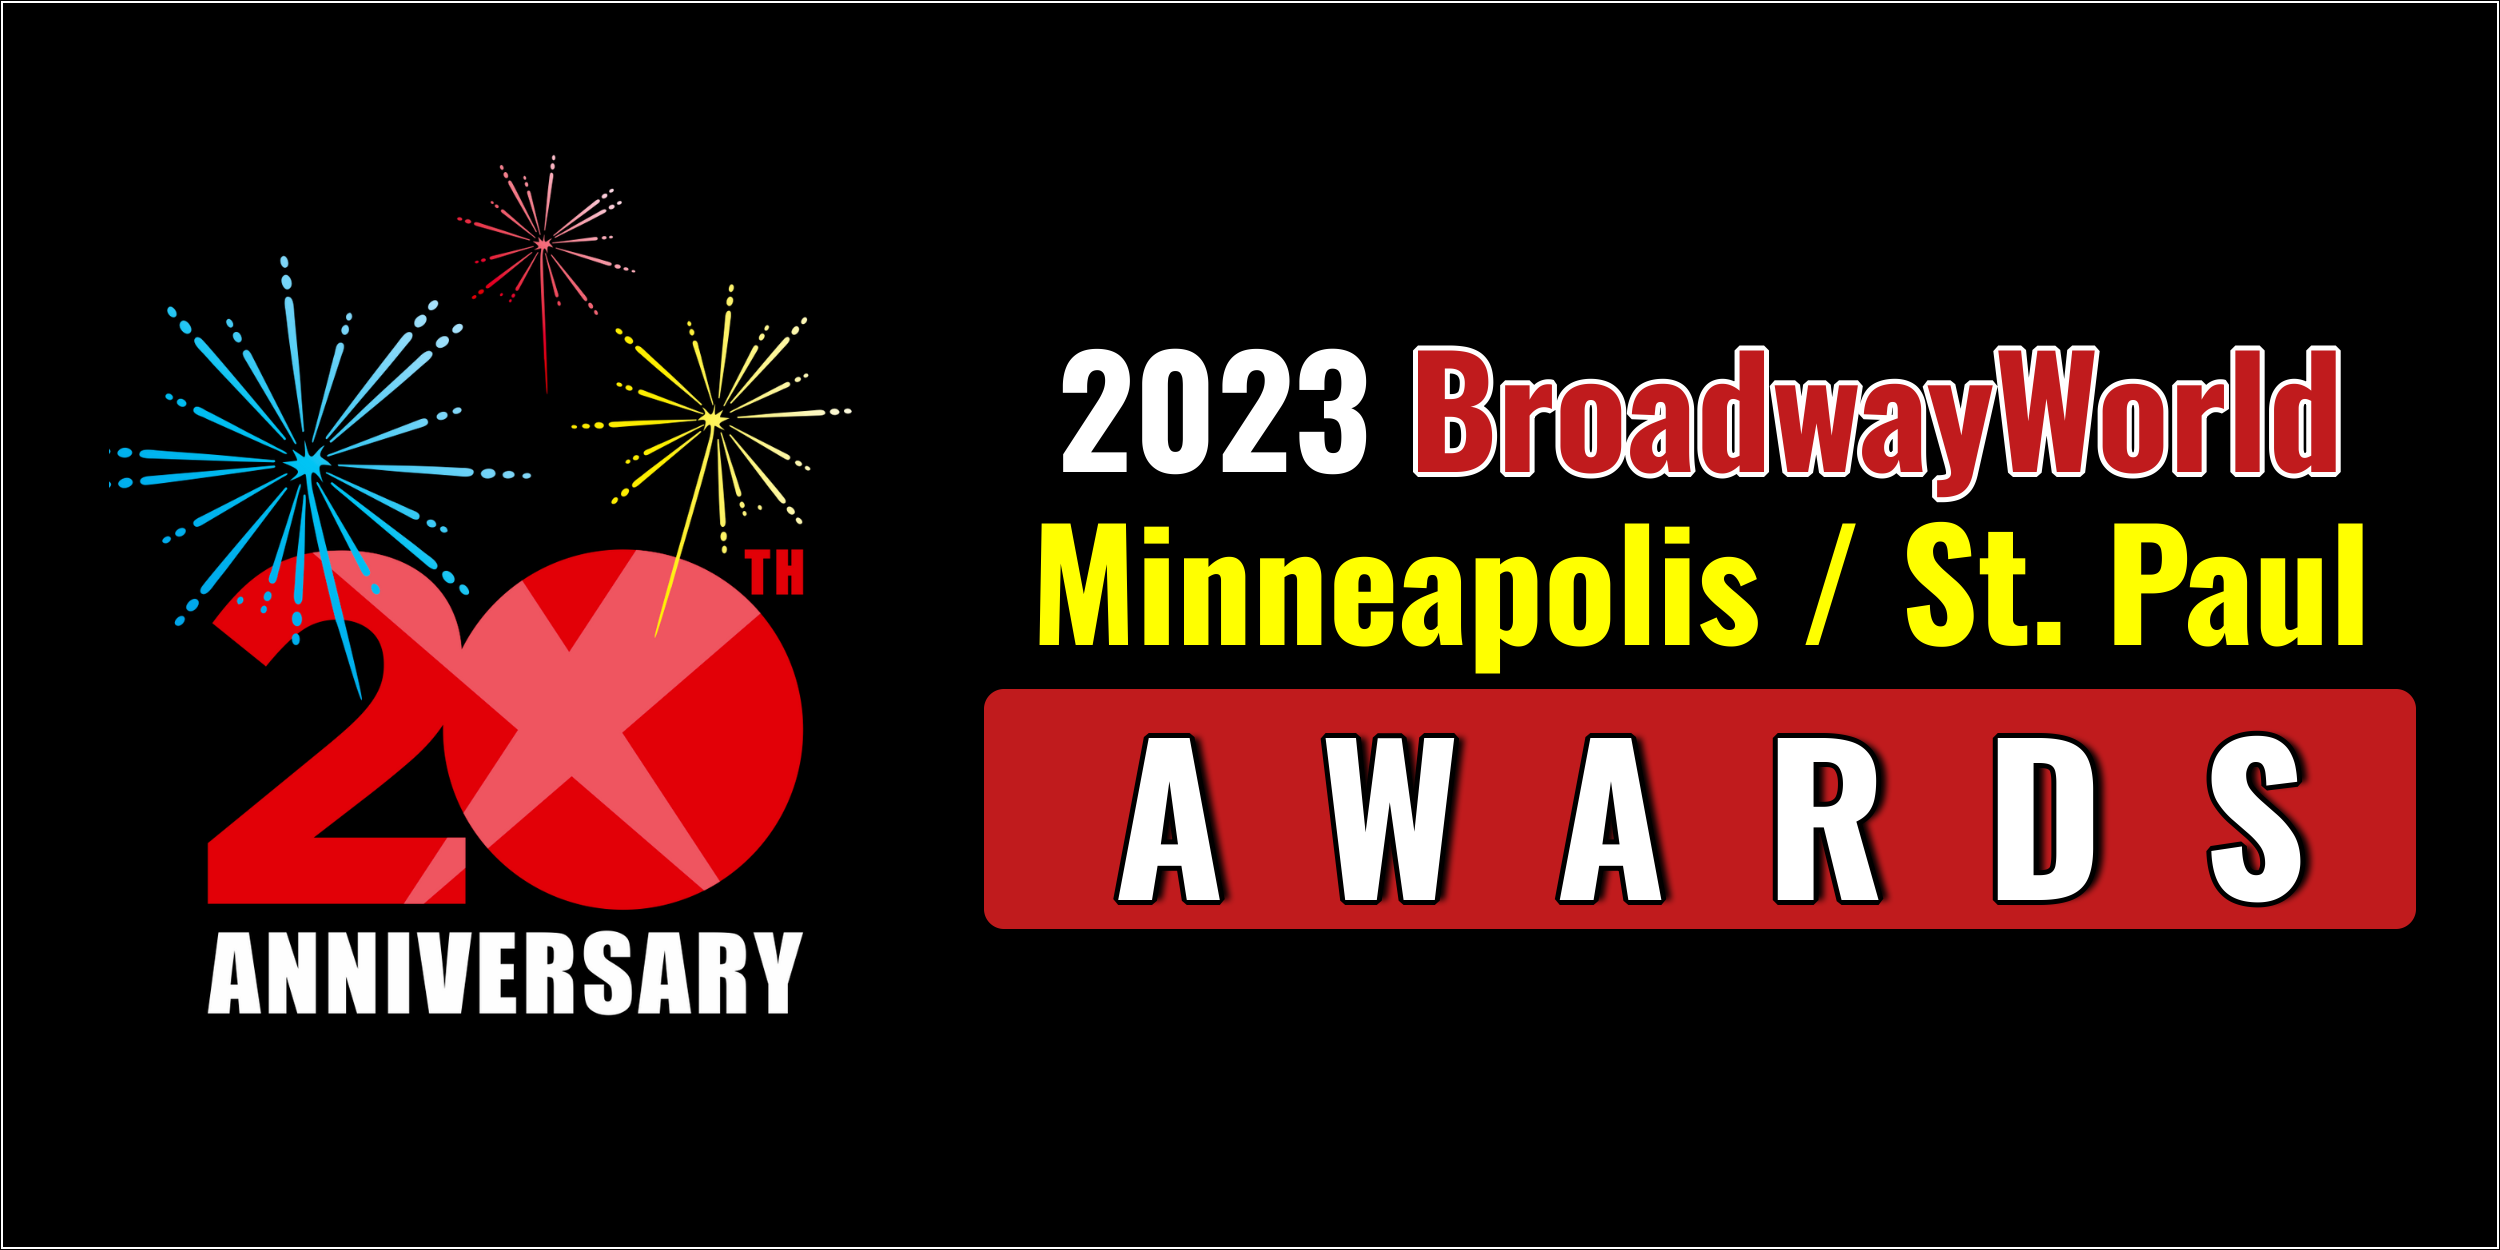 Latest Standings Announced For The 2023 BroadwayWorld Minneapolis / St. Paul Awards; MURDER ON THE ORIENT EXPRESS Leads Best Play! 